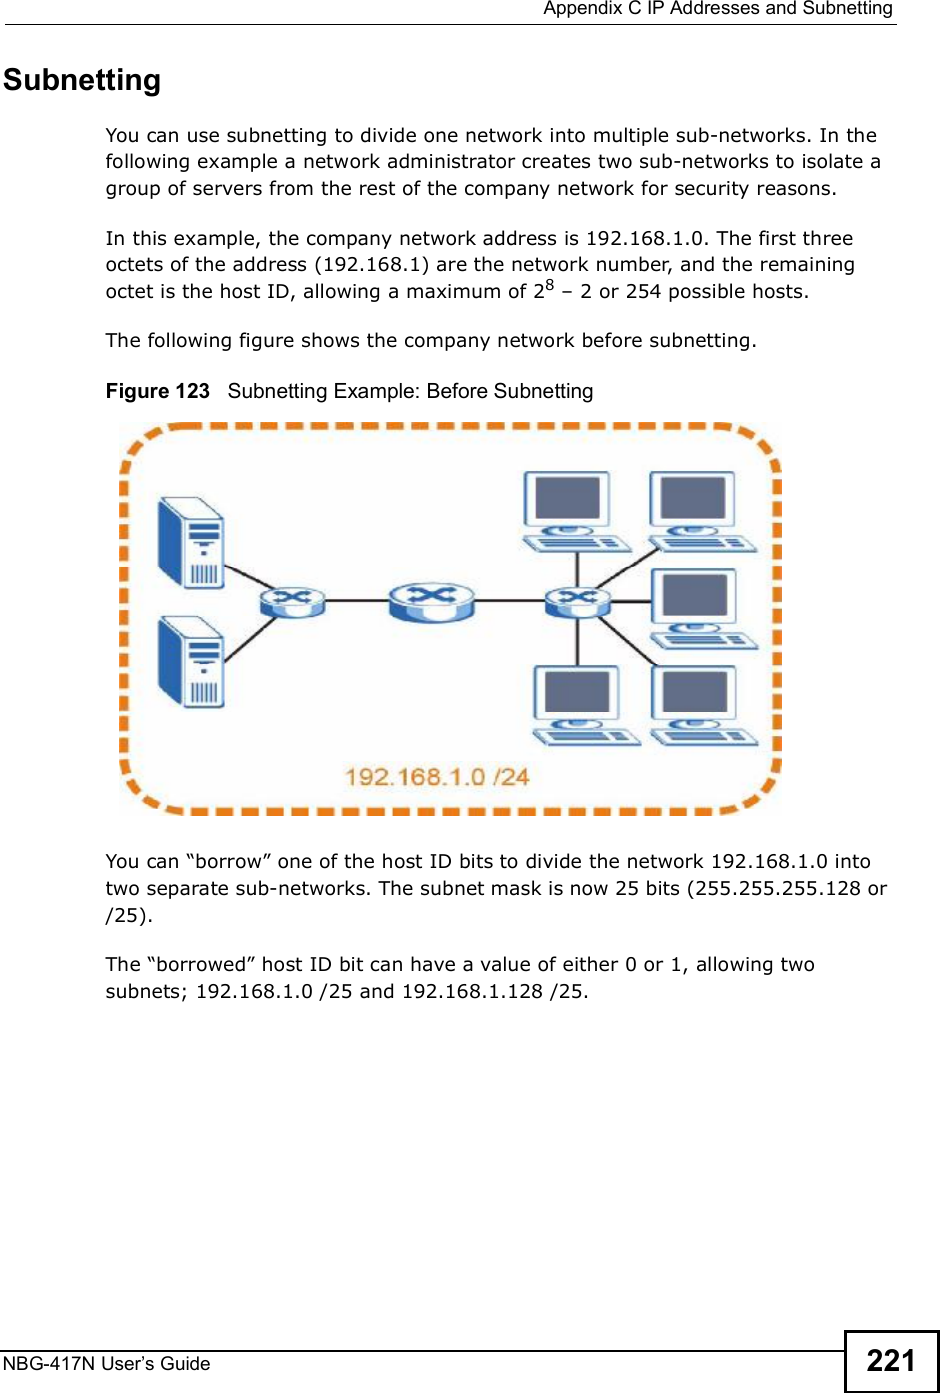  Appendix CIP Addresses and SubnettingNBG-417N User s Guide 221SubnettingYou can use subnetting to divide one network into multiple sub-networks. In the following example a network administrator creates two sub-networks to isolate a group of servers from the rest of the company network for security reasons.In this example, the company network address is 192.168.1.0. The first three octets of the address (192.168.1) are the network number, and the remaining octet is the host ID, allowing a maximum of 28 $ 2 or 254 possible hosts.The following figure shows the company network before subnetting.  Figure 123   Subnetting Example: Before SubnettingYou can &quot;borrow# one of the host ID bits to divide the network 192.168.1.0 into two separate sub-networks. The subnet mask is now 25 bits (255.255.255.128 or /25).The &quot;borrowed# host ID bit can have a value of either 0 or 1, allowing two subnets; 192.168.1.0 /25 and 192.168.1.128 /25. 